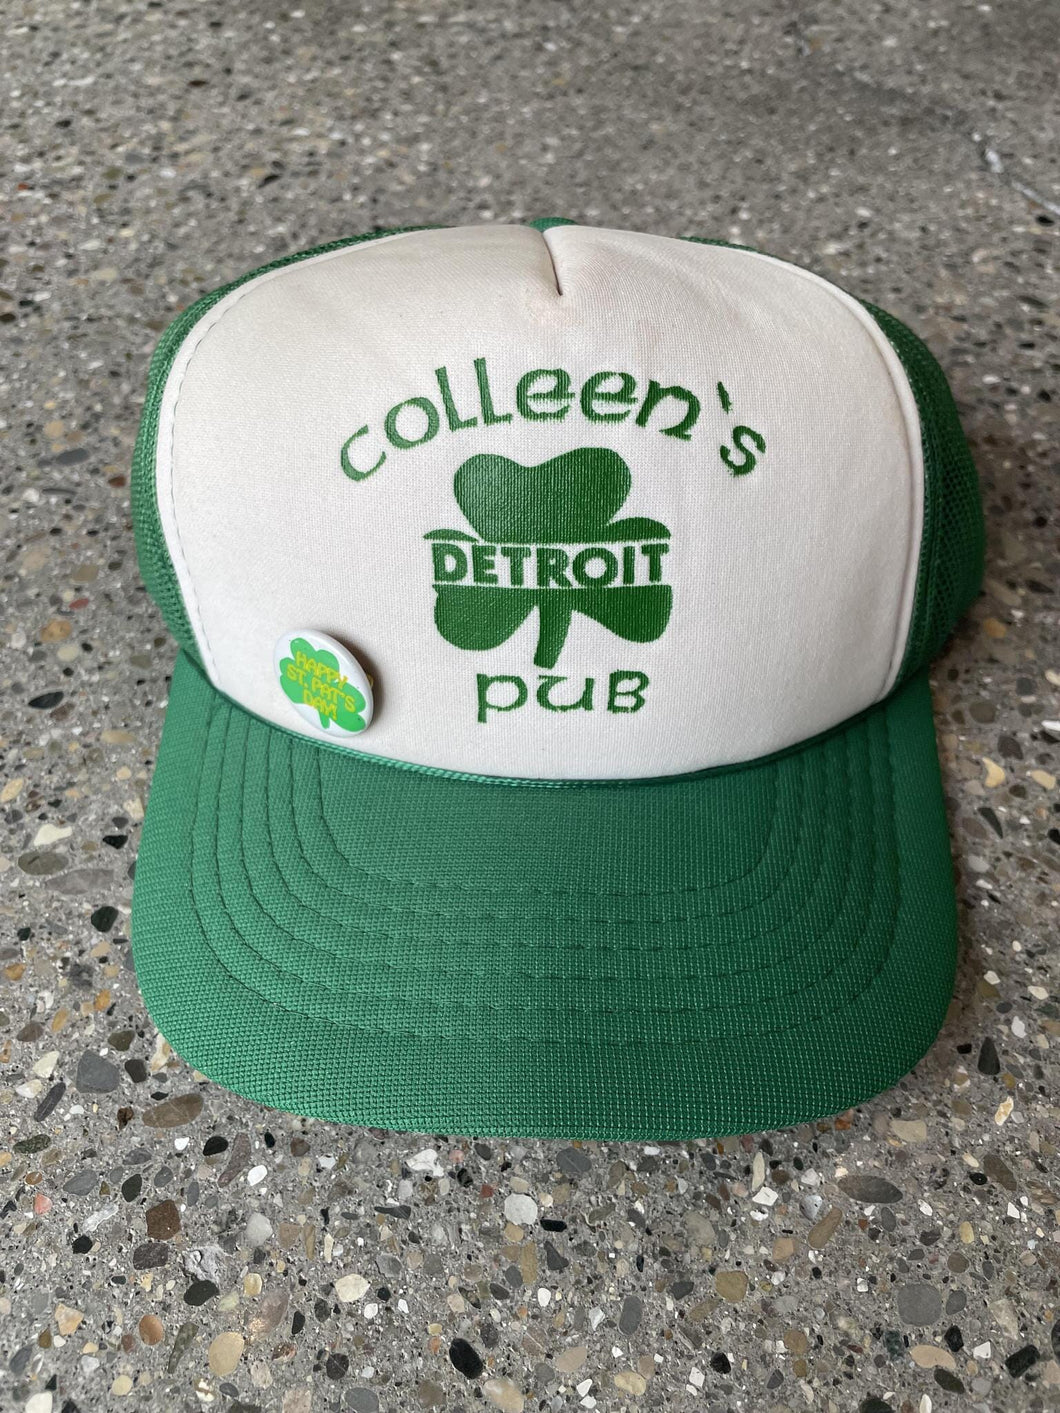 Detroit Colleen's Pub Saint Patrick's Day With Pin Vintage Trucker Hat White Green ABC Vintage 